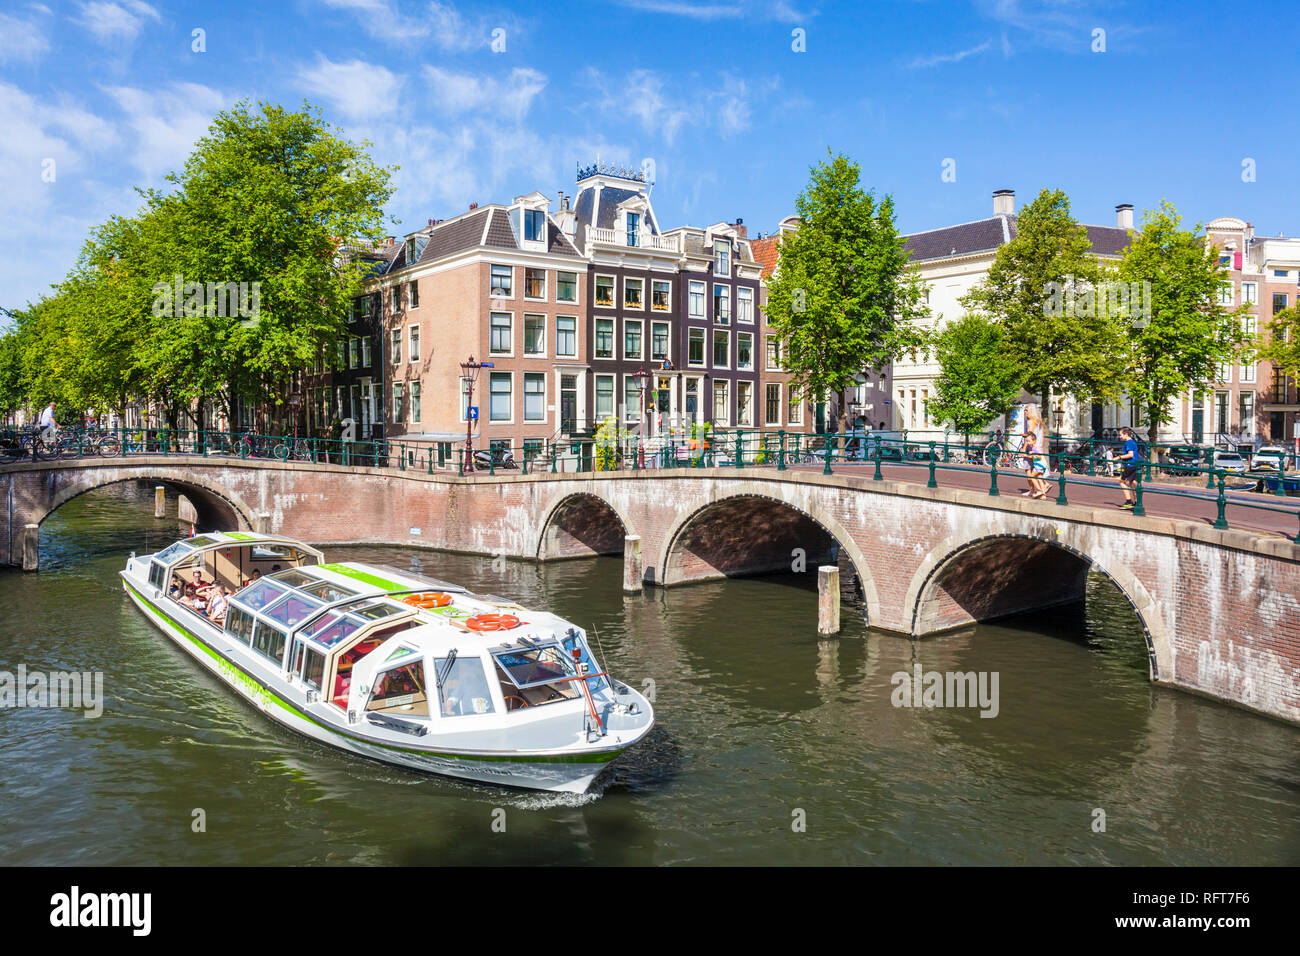 Canal tour boat and bridges at the junction of Leidsegracht Canal and Keizergracht Canal, Amsterdam, North Holland, Netherlands, Europe Stock Photo